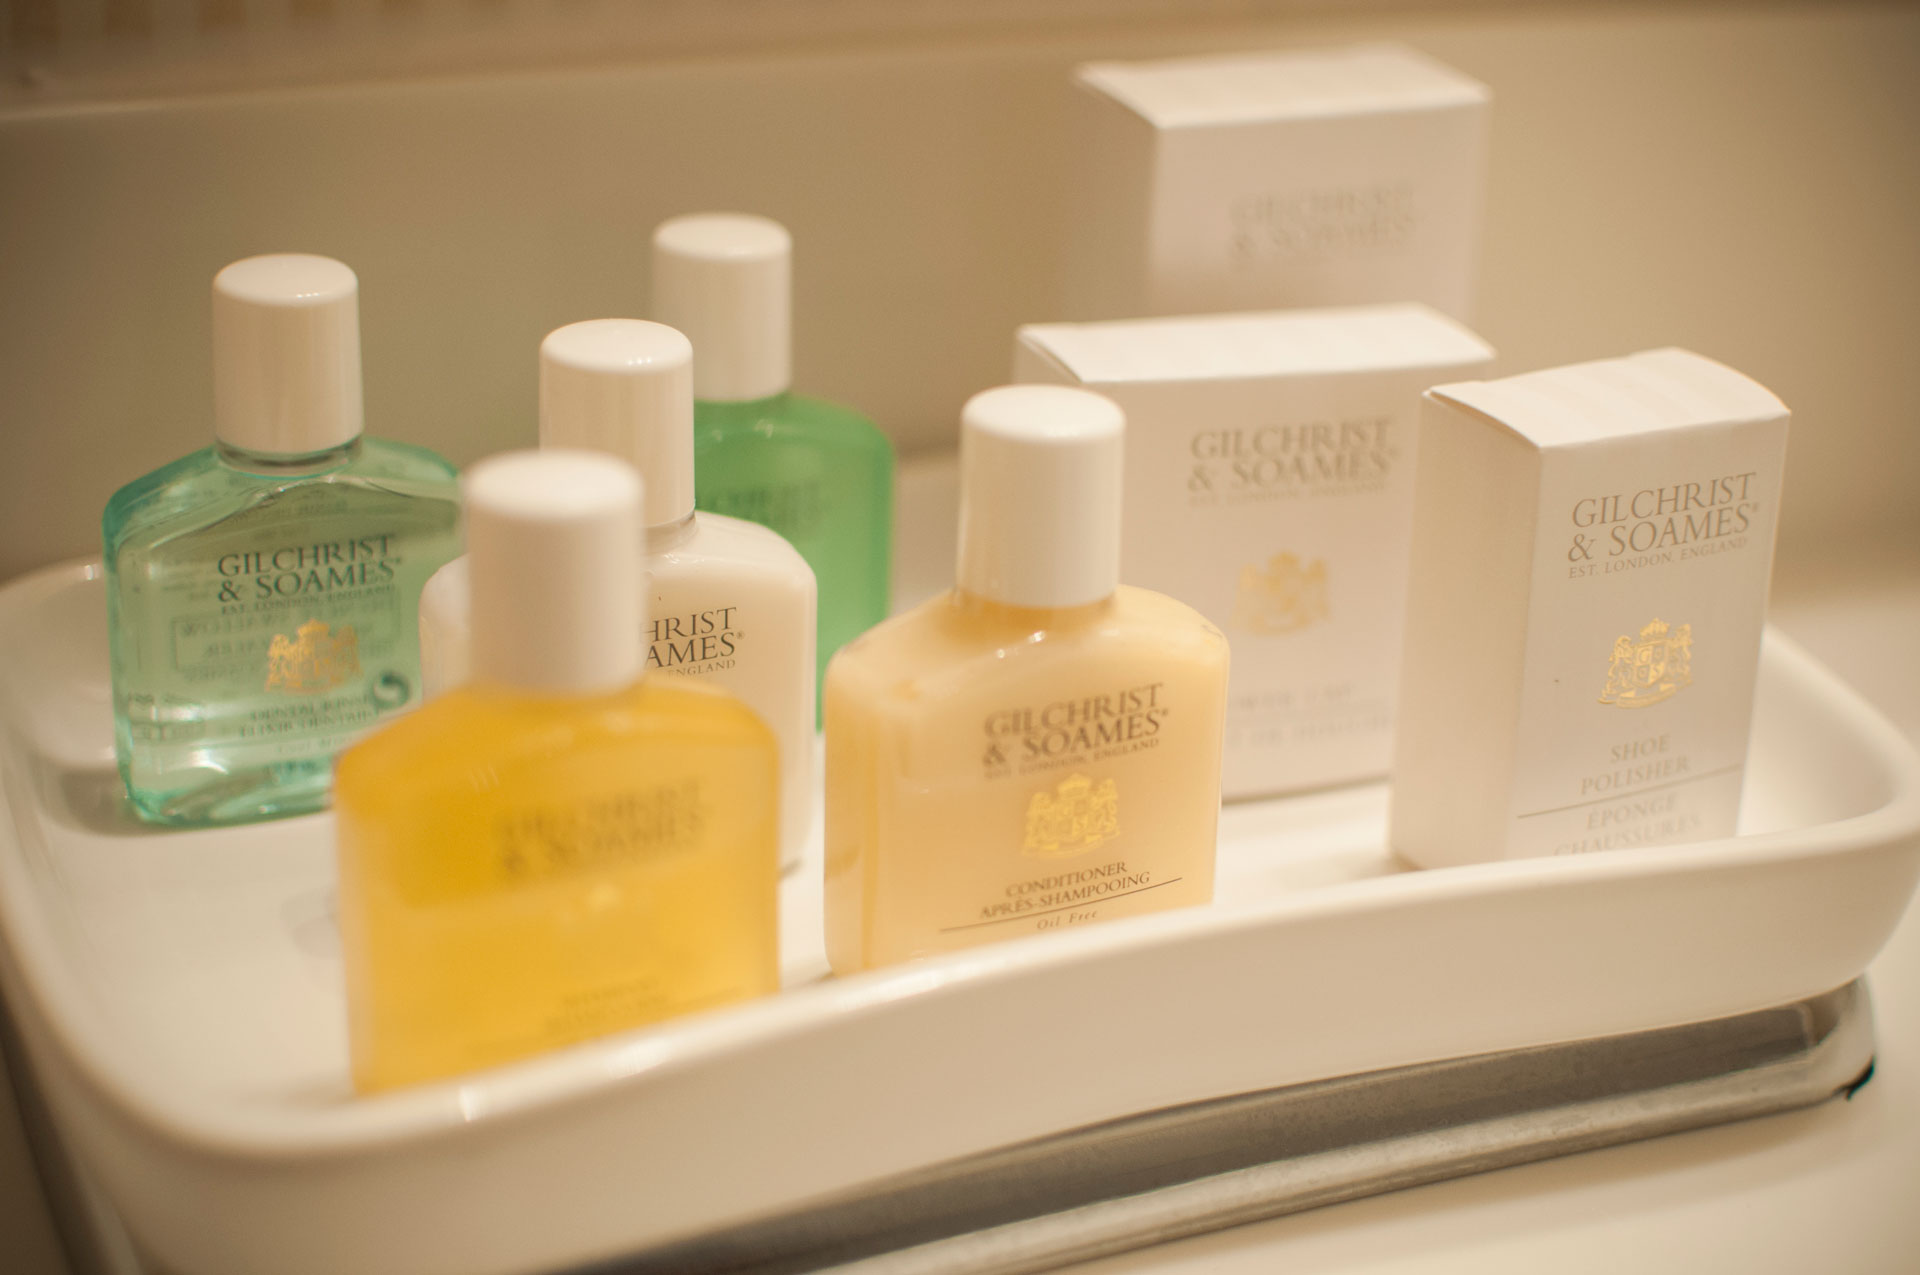 Bath amenities by Gilchrist & Soames